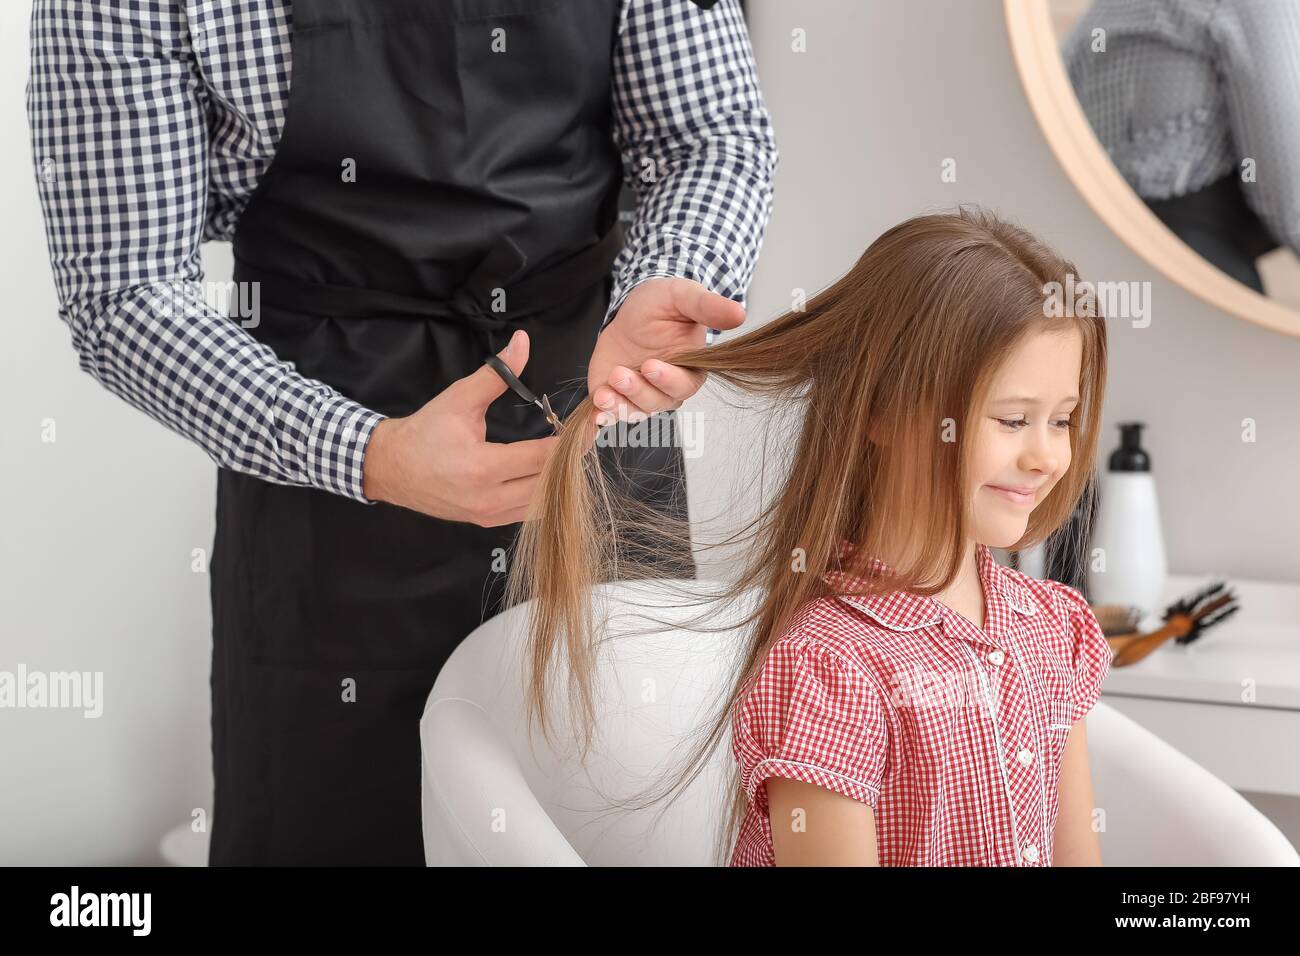 https://c8.alamy.com/comp/2BF97YH/hairdresser-working-with-little-girl-in-salon-2BF97YH.jpg